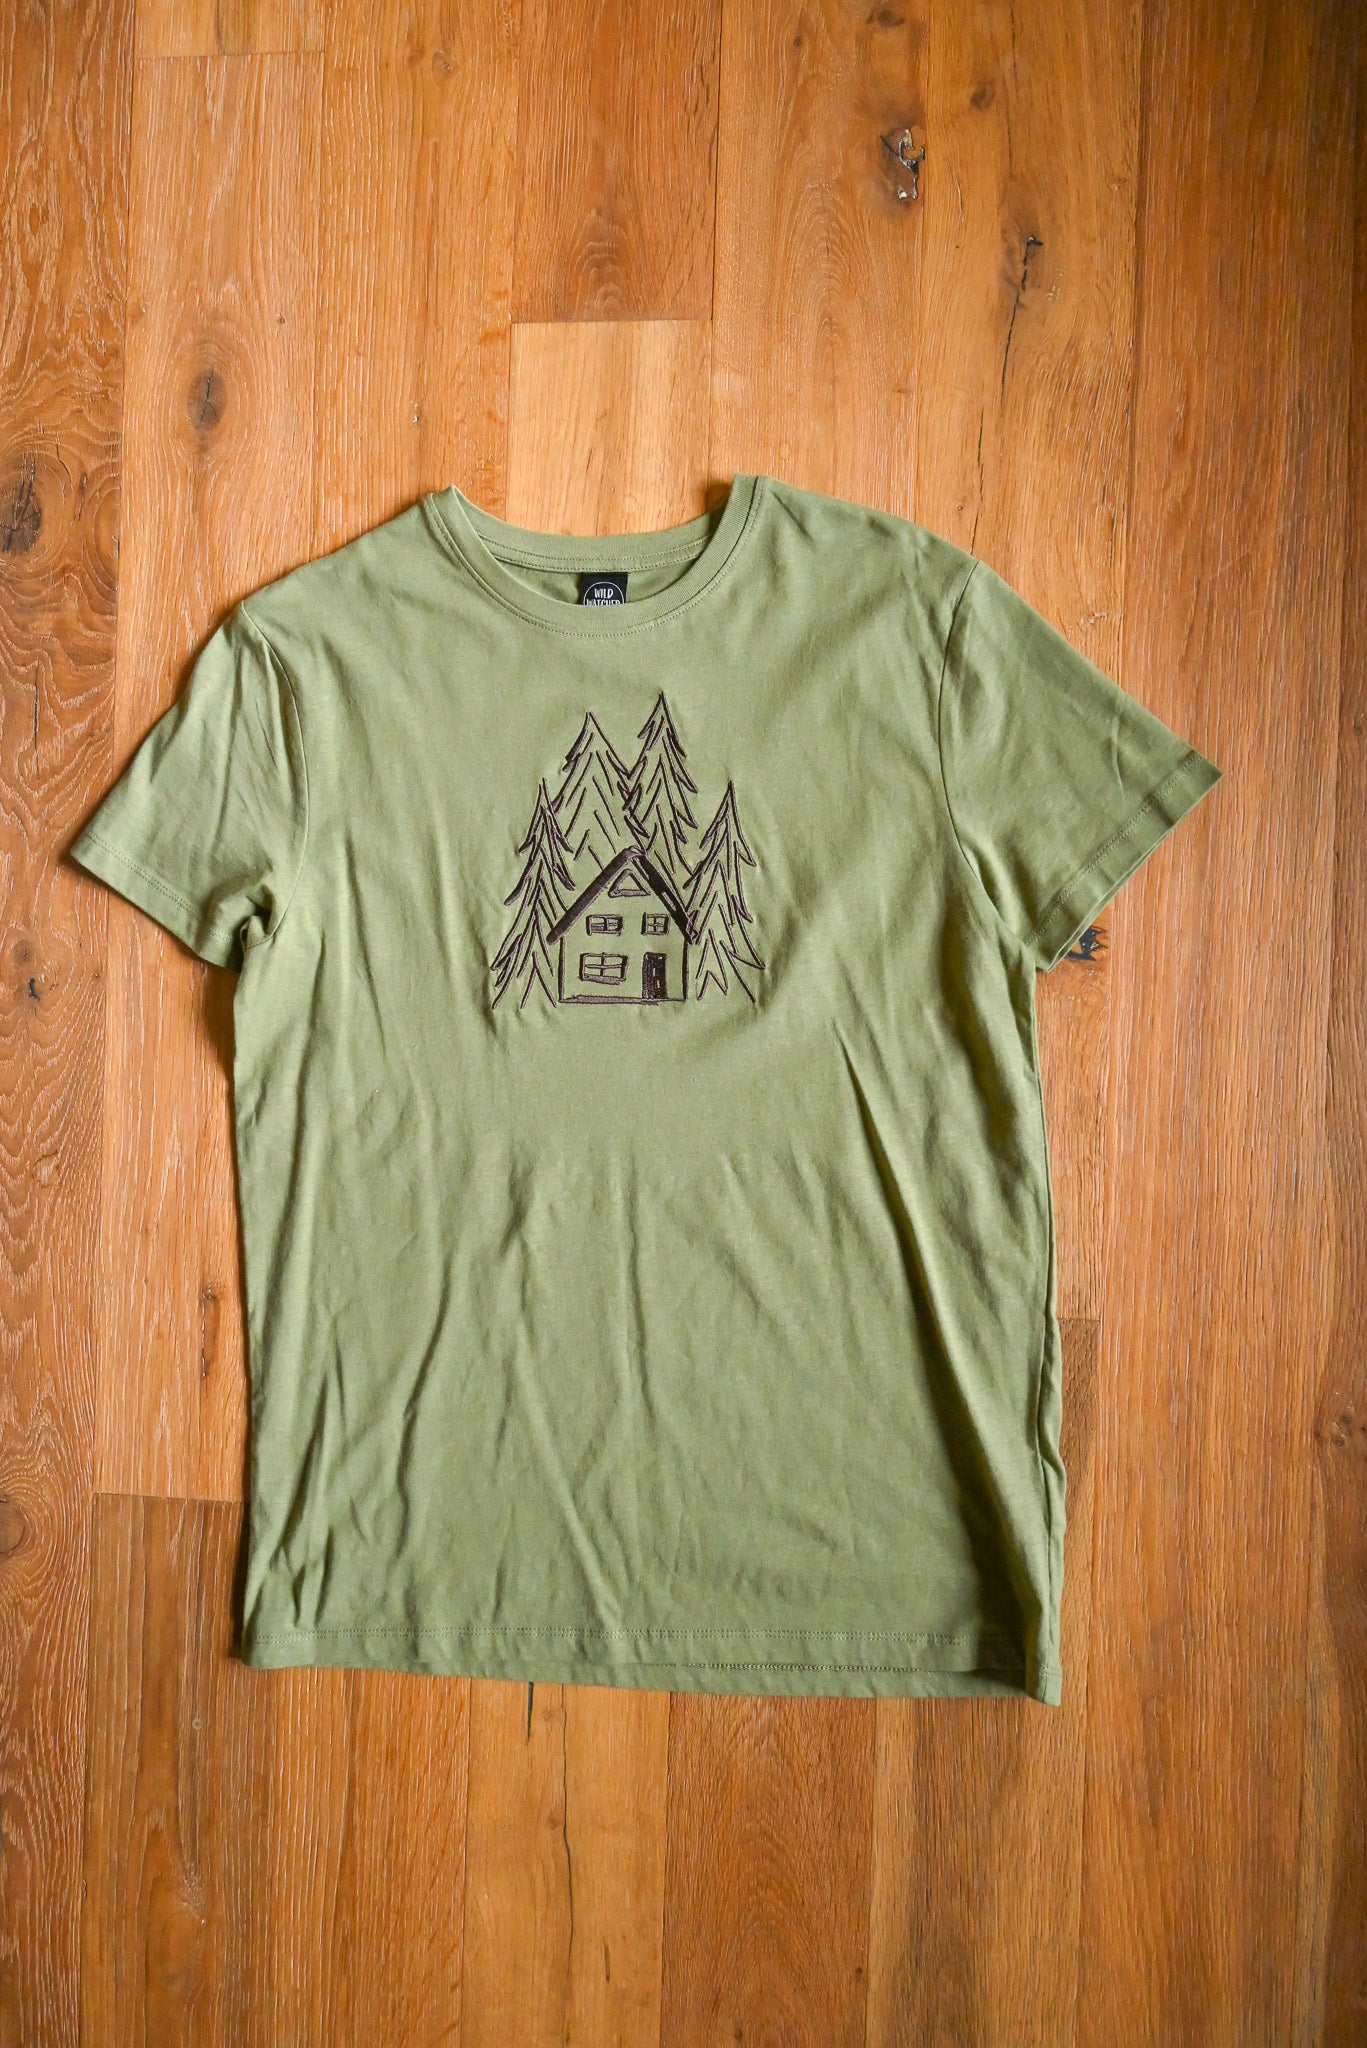 SIZE M UK 12-14 Cabin in the Forest Organic Cotton T-shirt